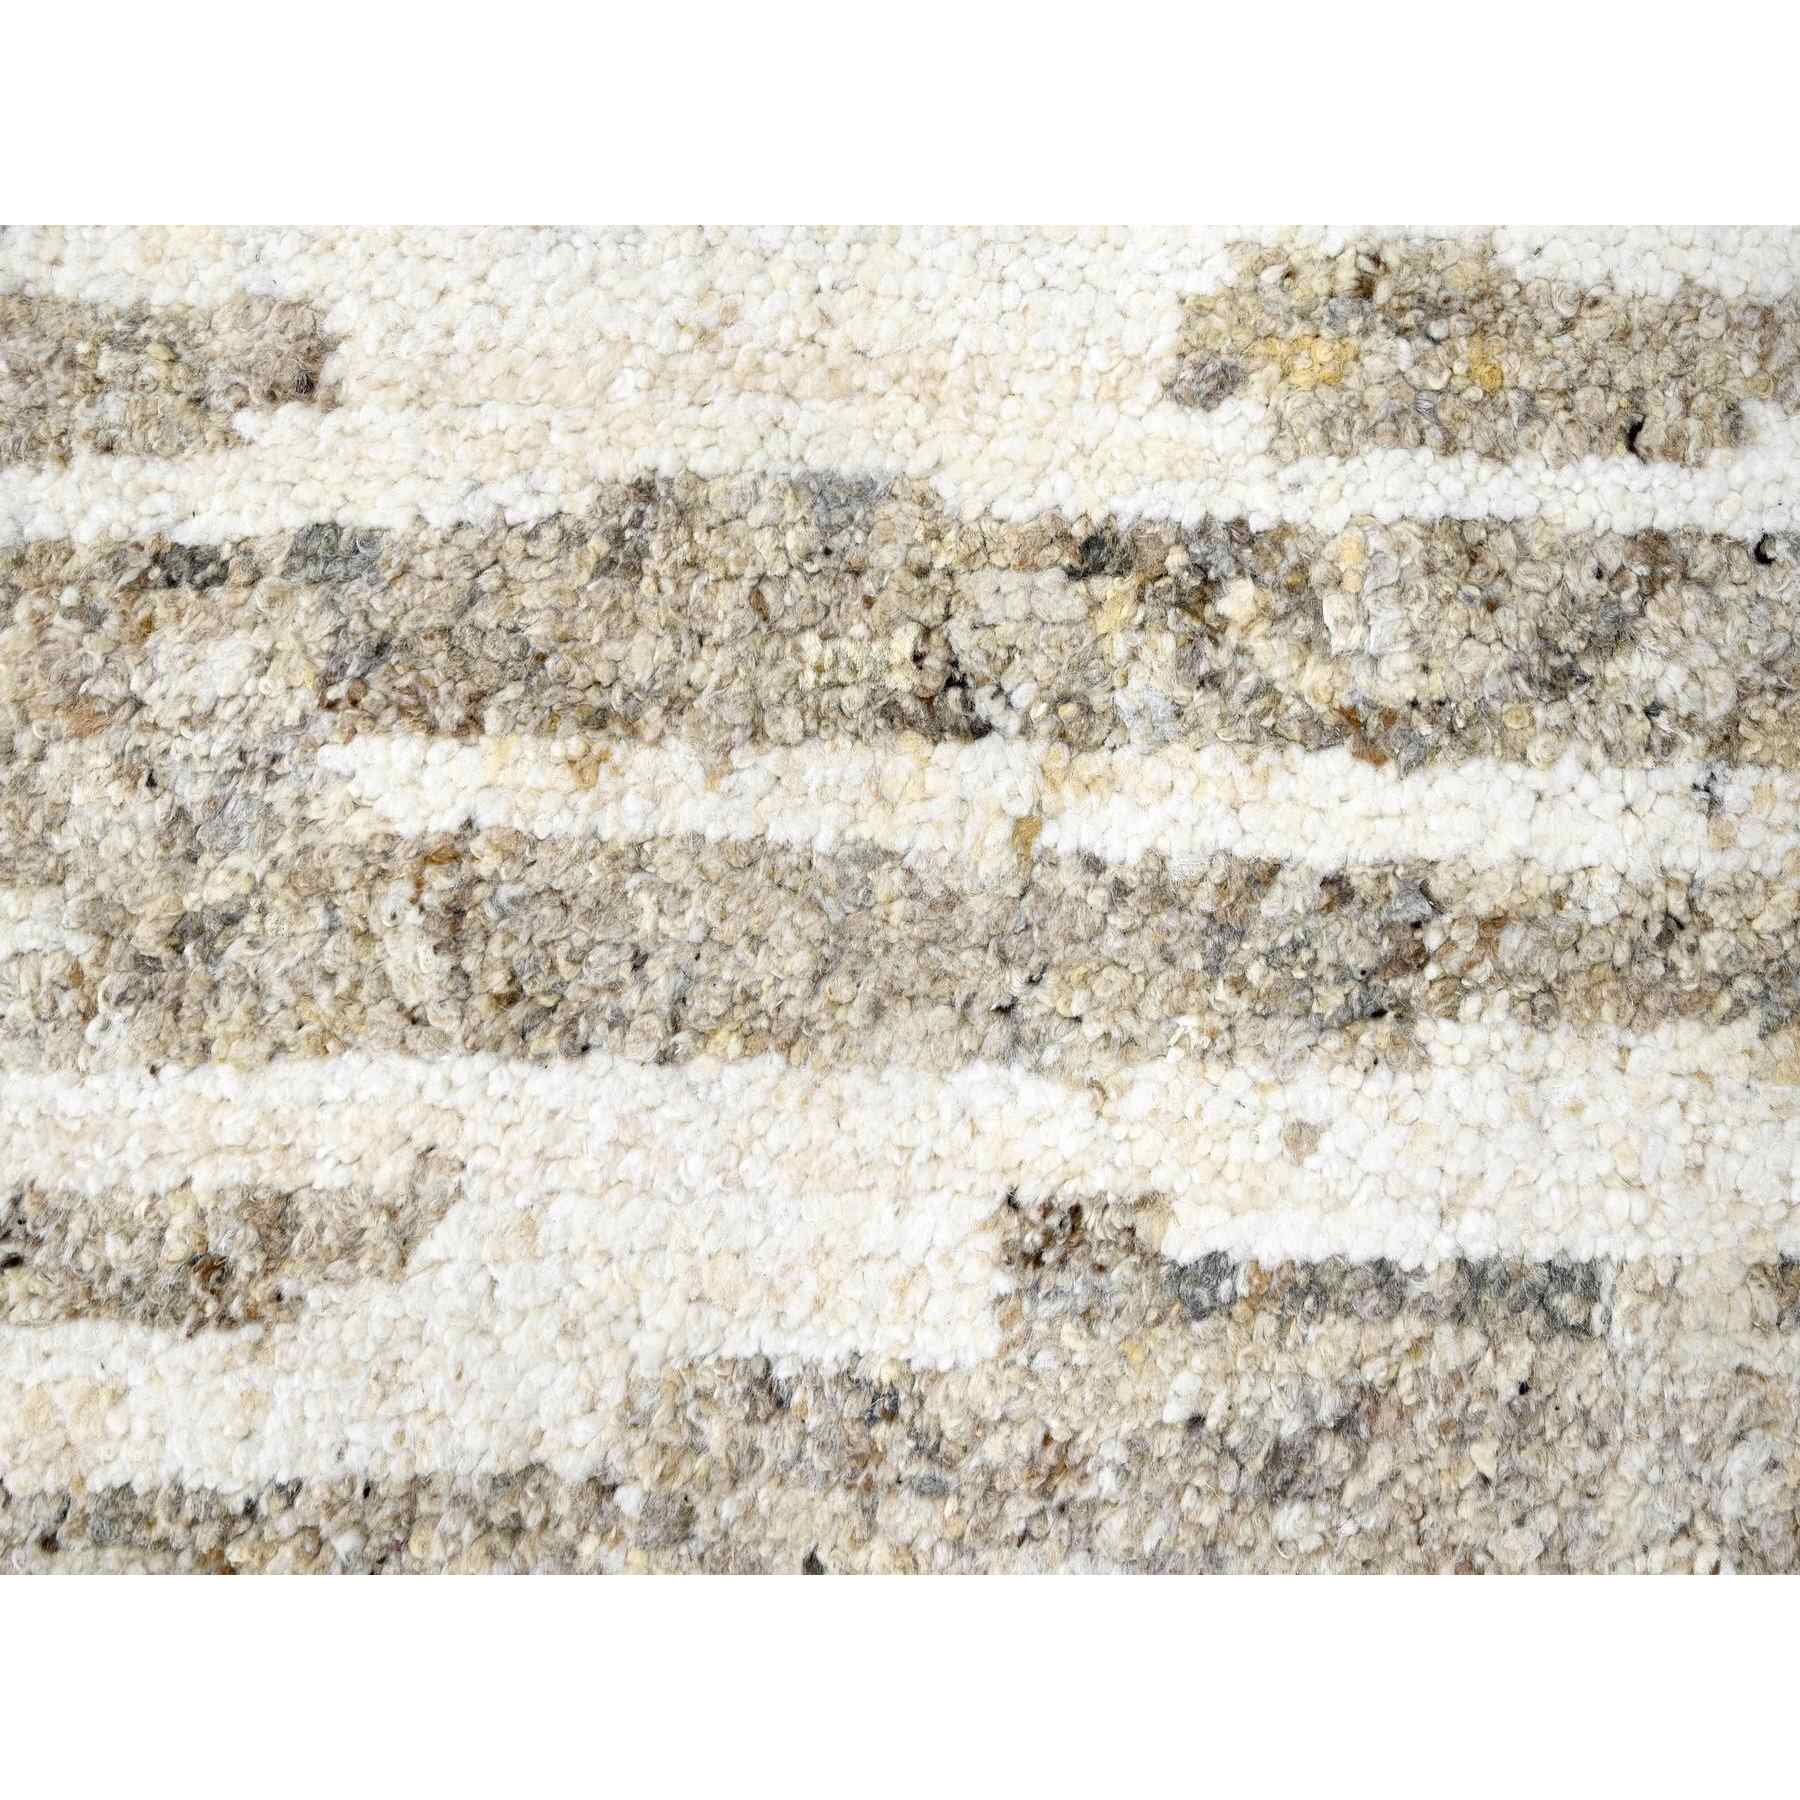 Modern-and-Contemporary-Hand-Knotted-Rug-422705